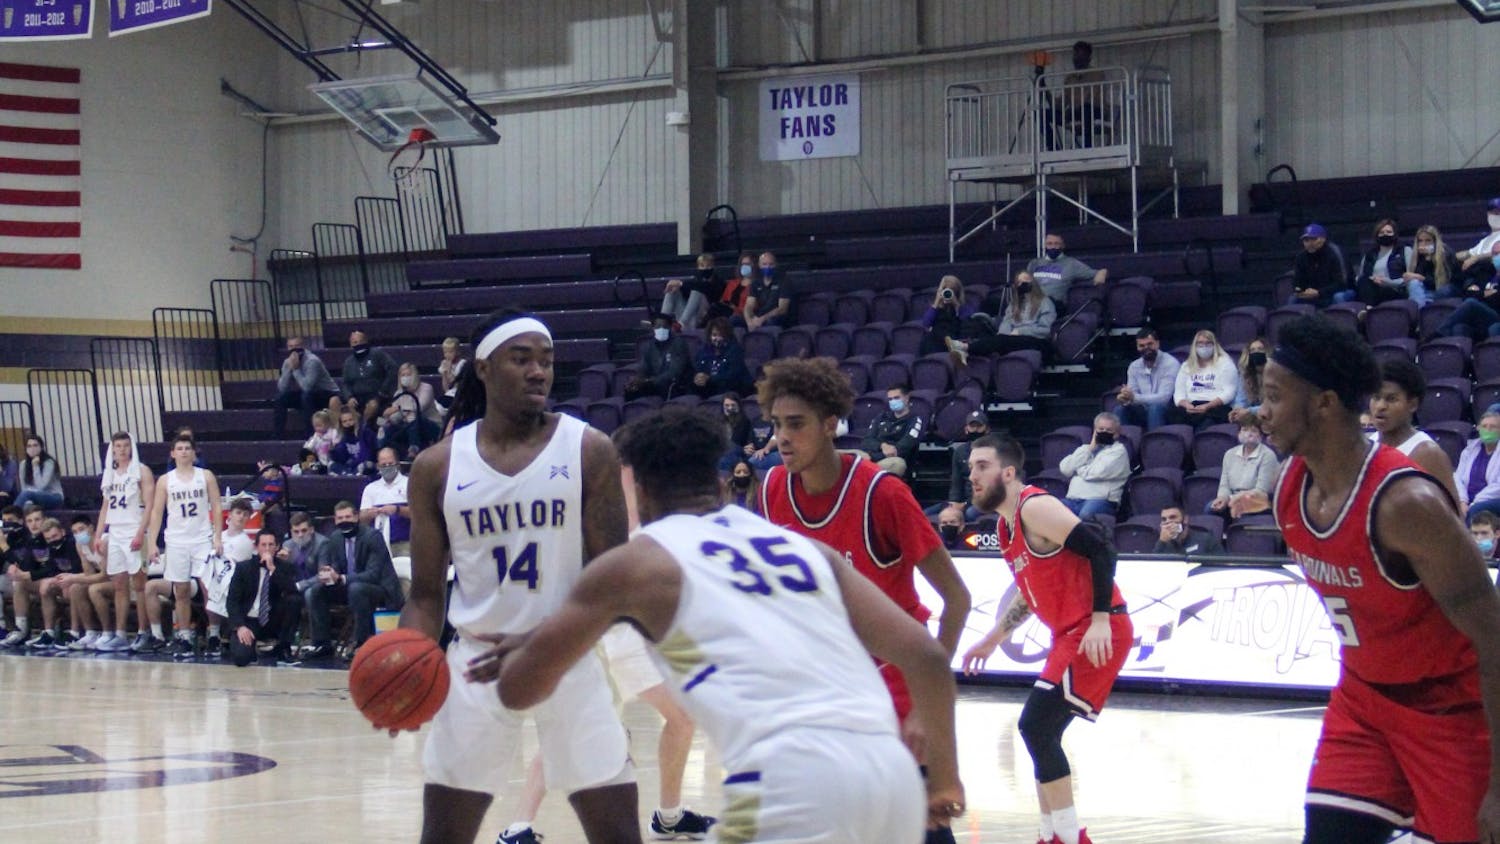 TU lost a tight game against Thomas More, but had an impressive outing against Governors State the next day.